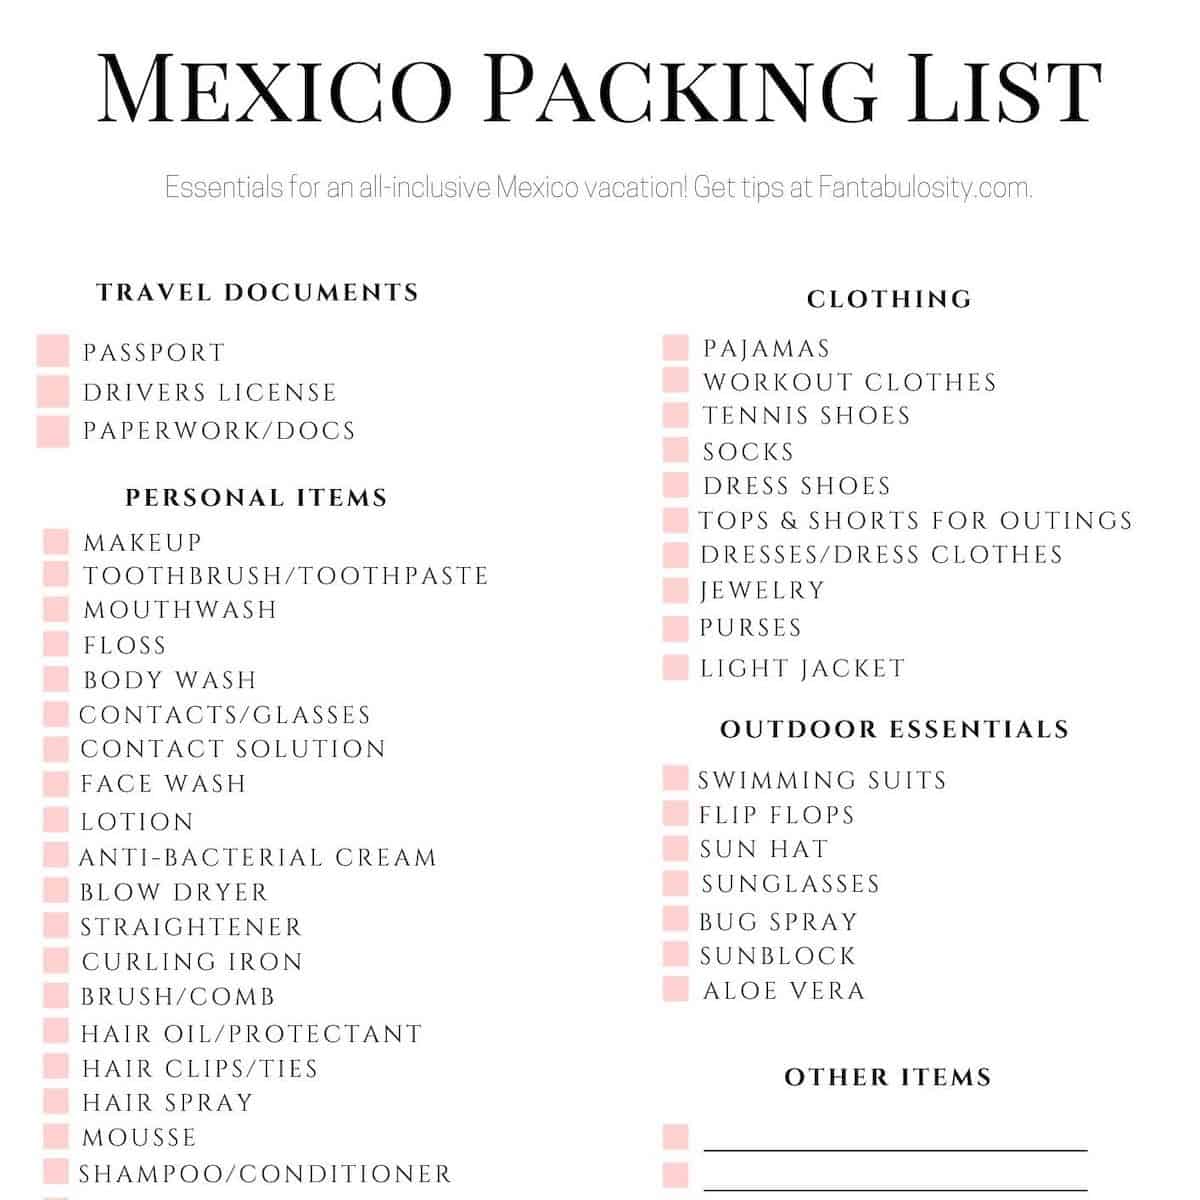 What To Pack For All Inclusive Trip To Mexico?